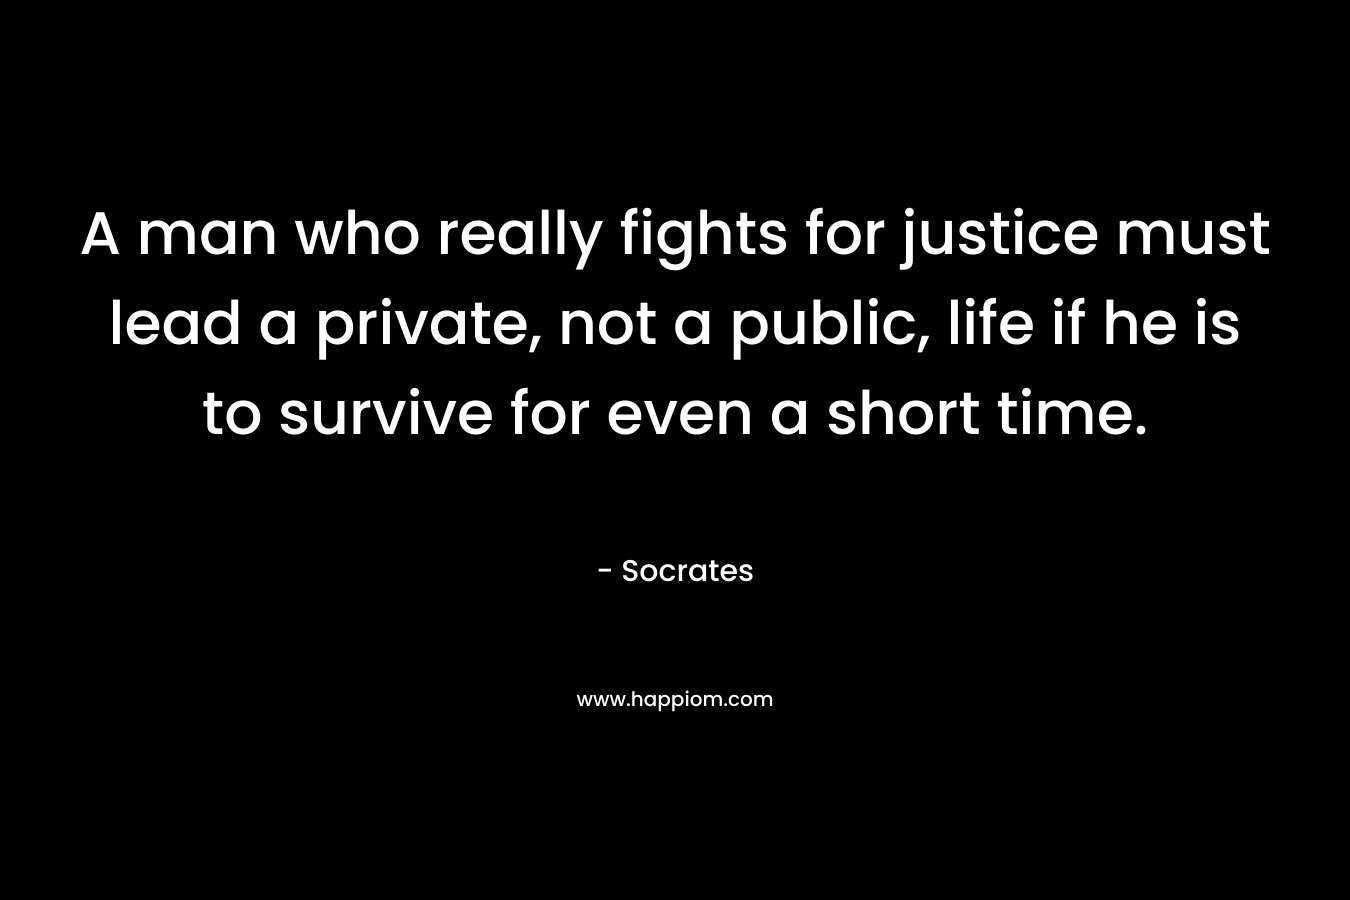 A man who really fights for justice must lead a private, not a public, life if he is to survive for even a short time. – Socrates